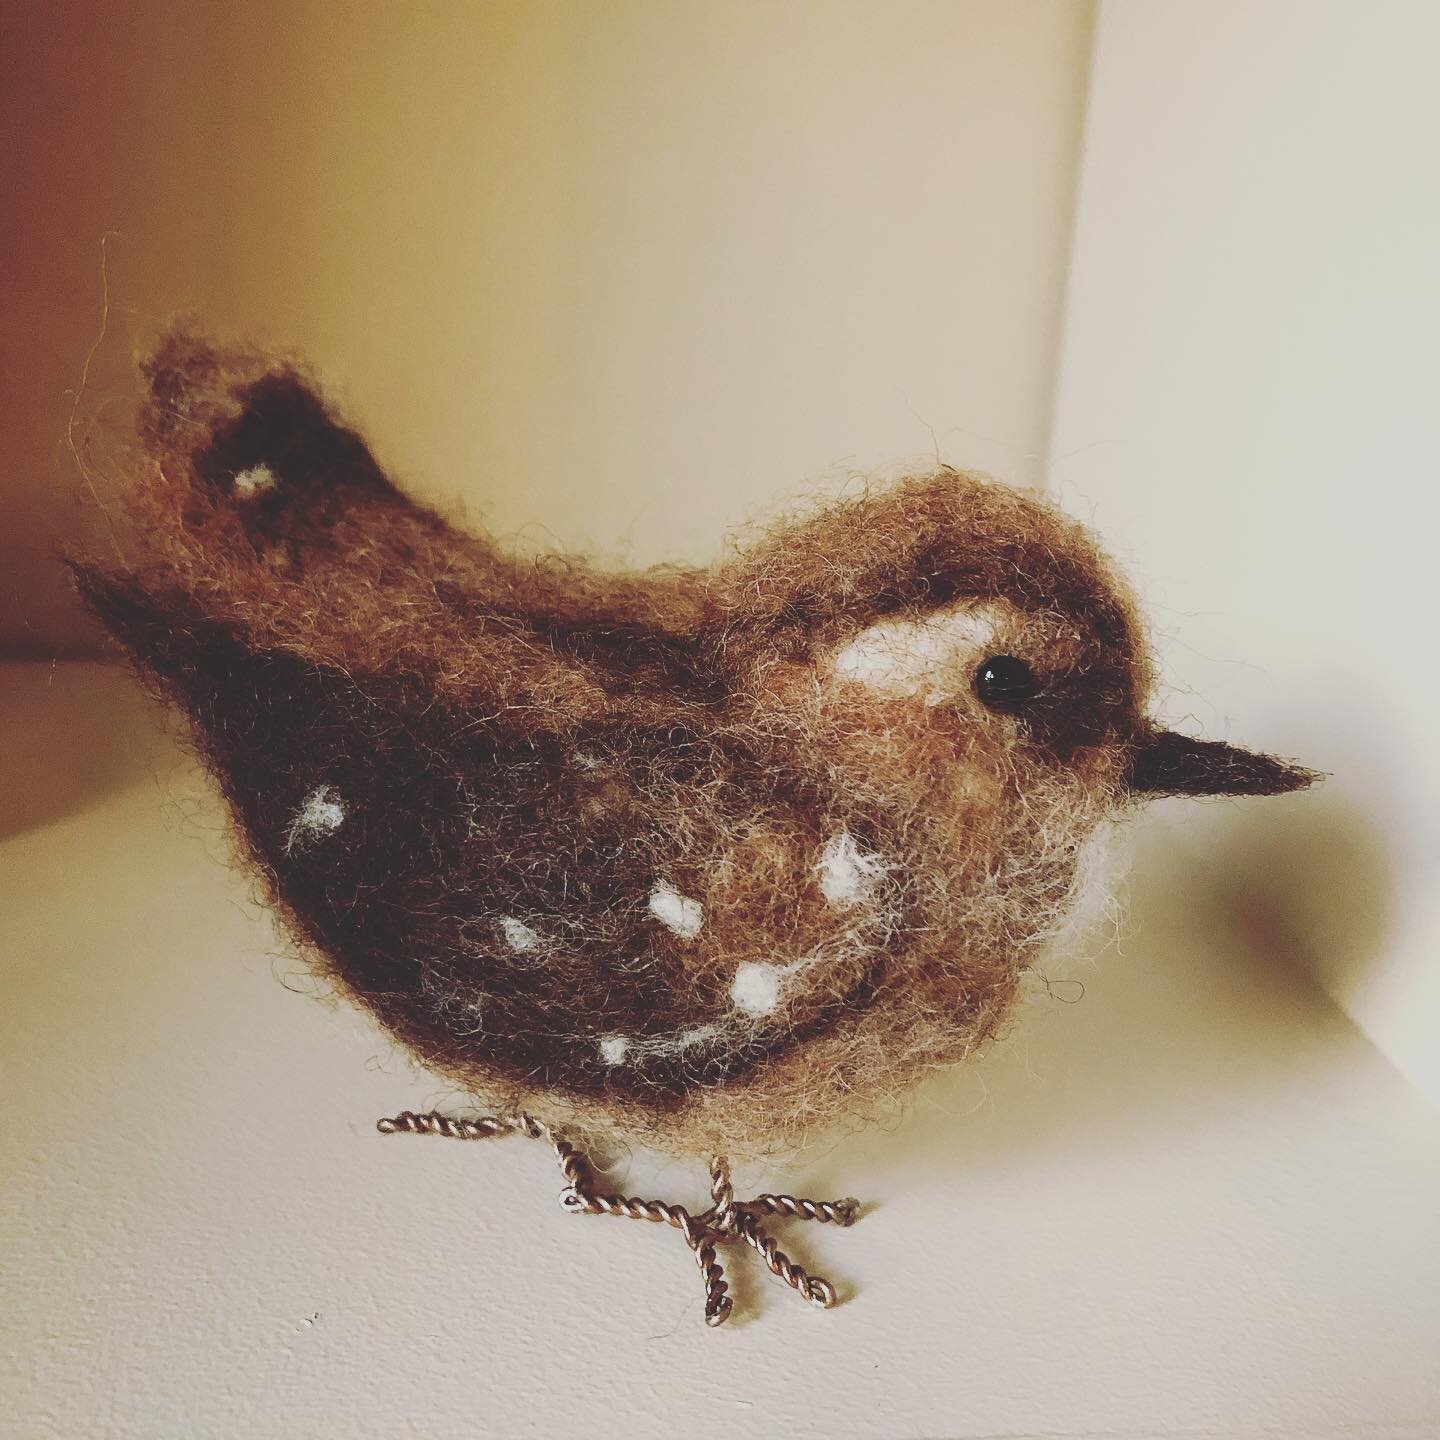 I give you....&rdquo;Wren&rdquo;
Where has #felting been my whole life? 
#lockdowncrafts #newobsession